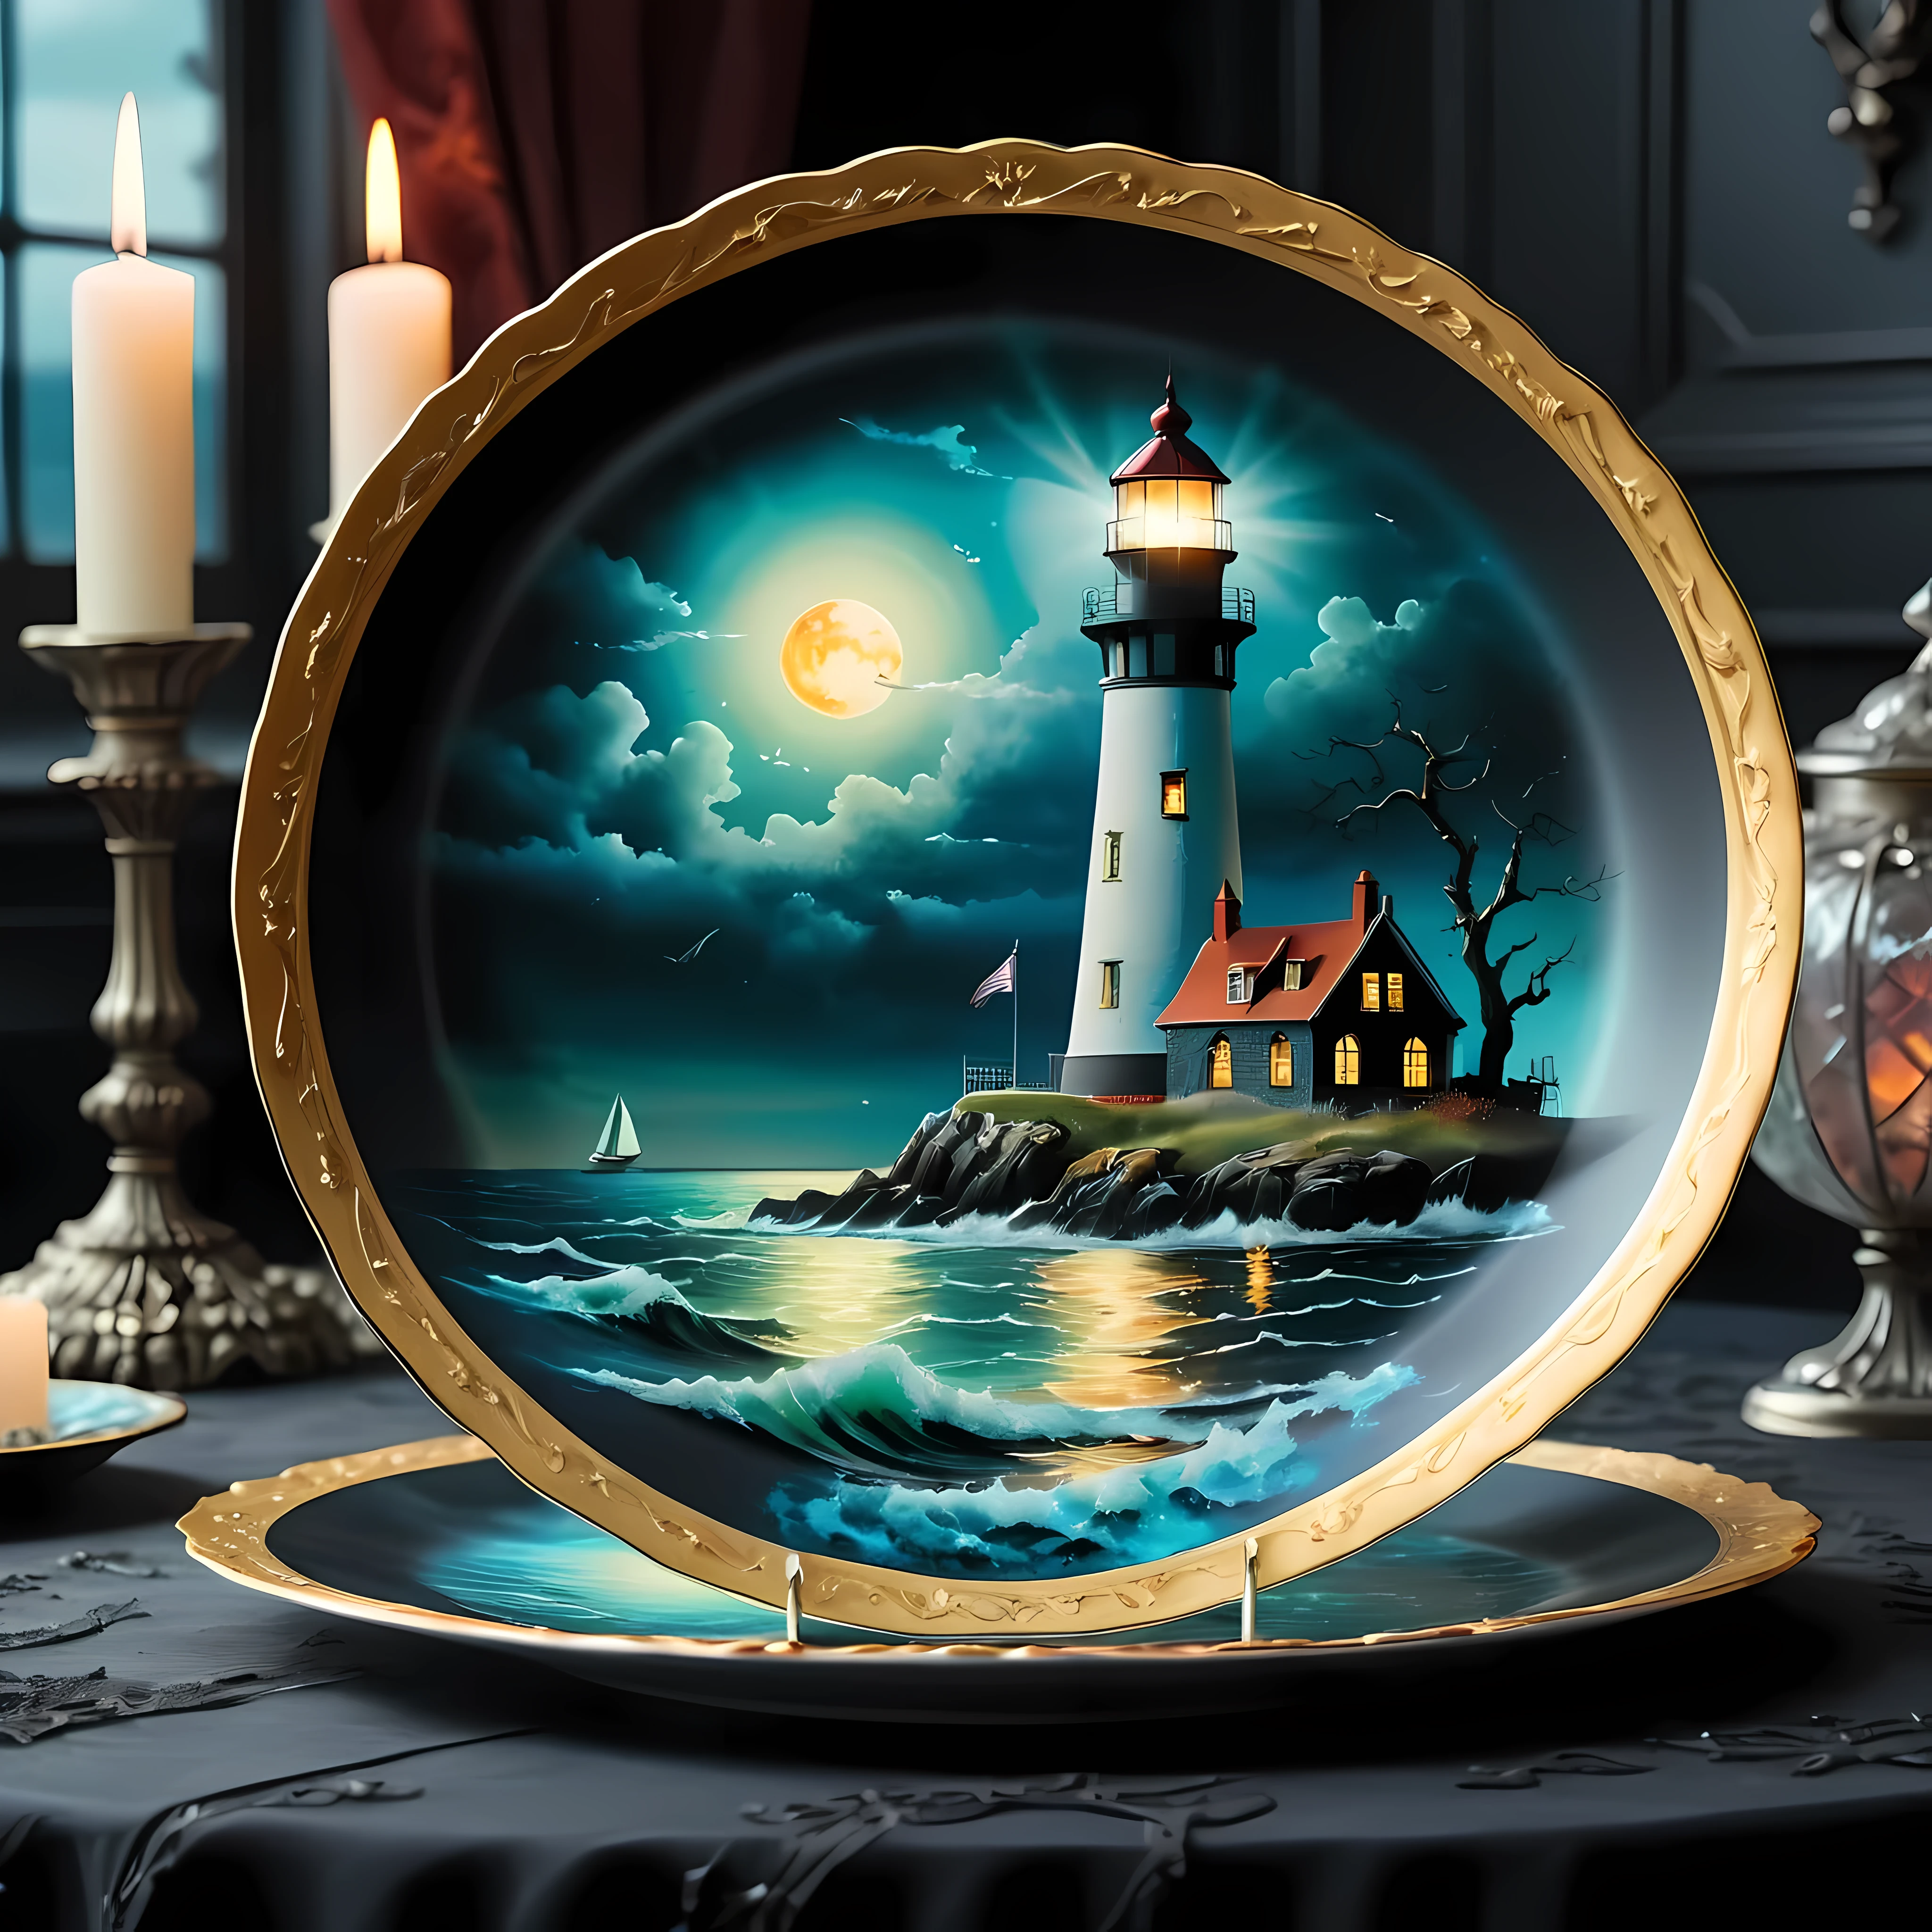 Masterpiece in maximum 16K resolution, superb quality, close up of an elegant plate with an image of an eerie marine scene with an otherworldly lighthouse, vintage look, the plate iade of finest crystals) and positioned on an empty black table with gothic patters, colorful. | ((More_Detail))
